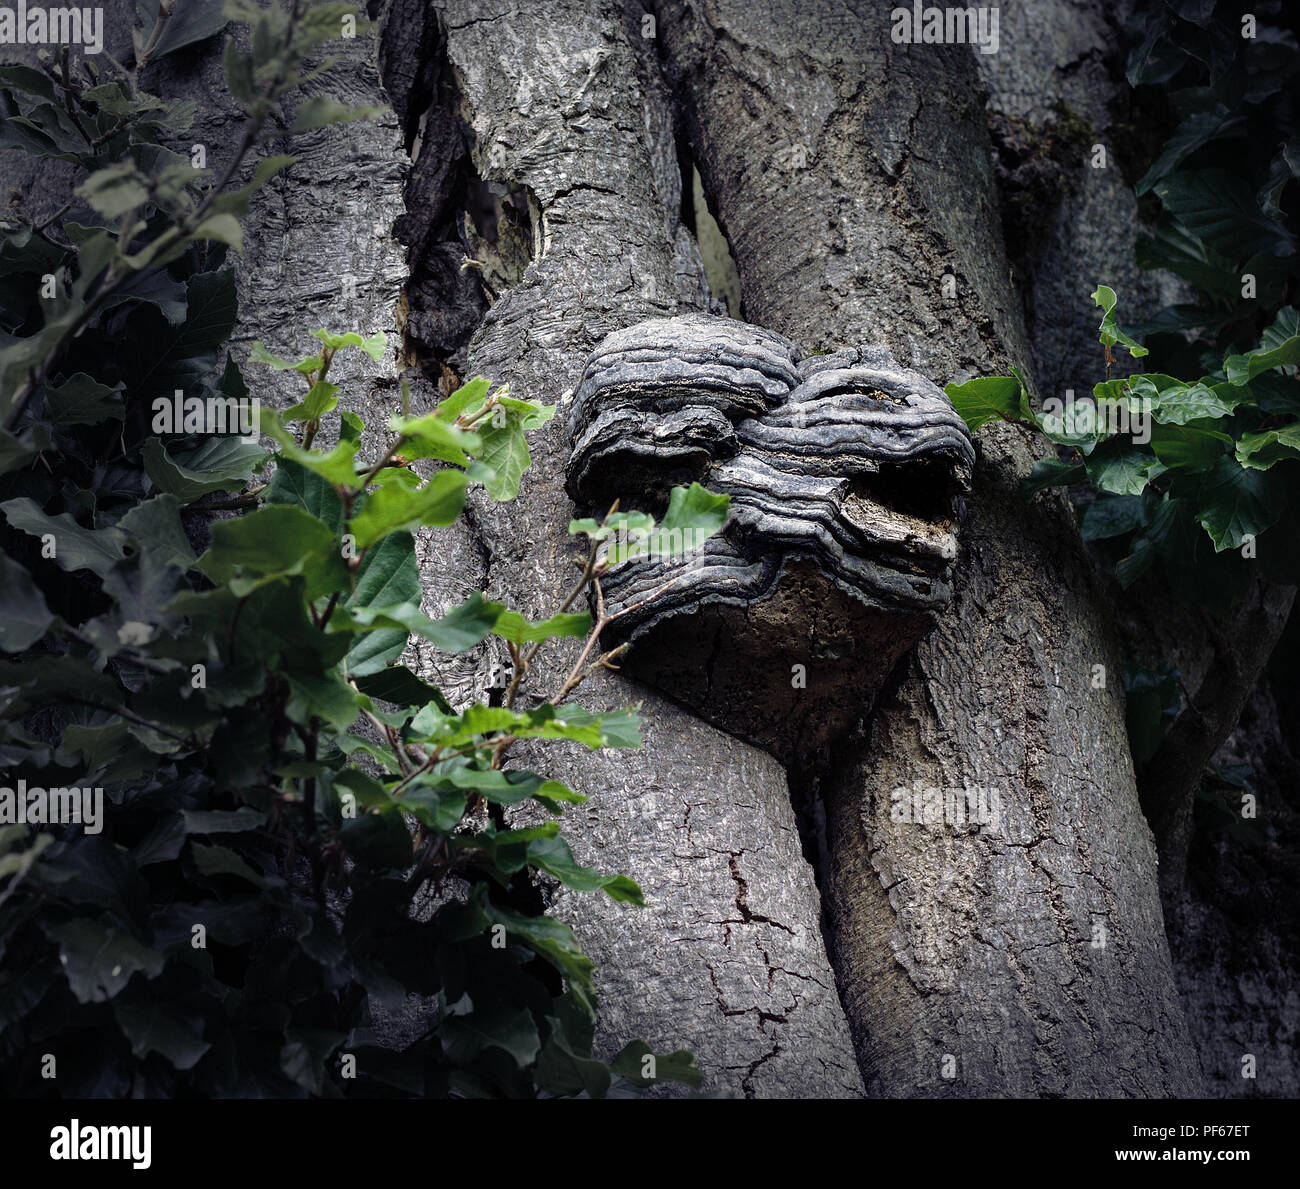 Tree trunk with large excrescence that looks like a monster's head baring its teeth Stock Photo